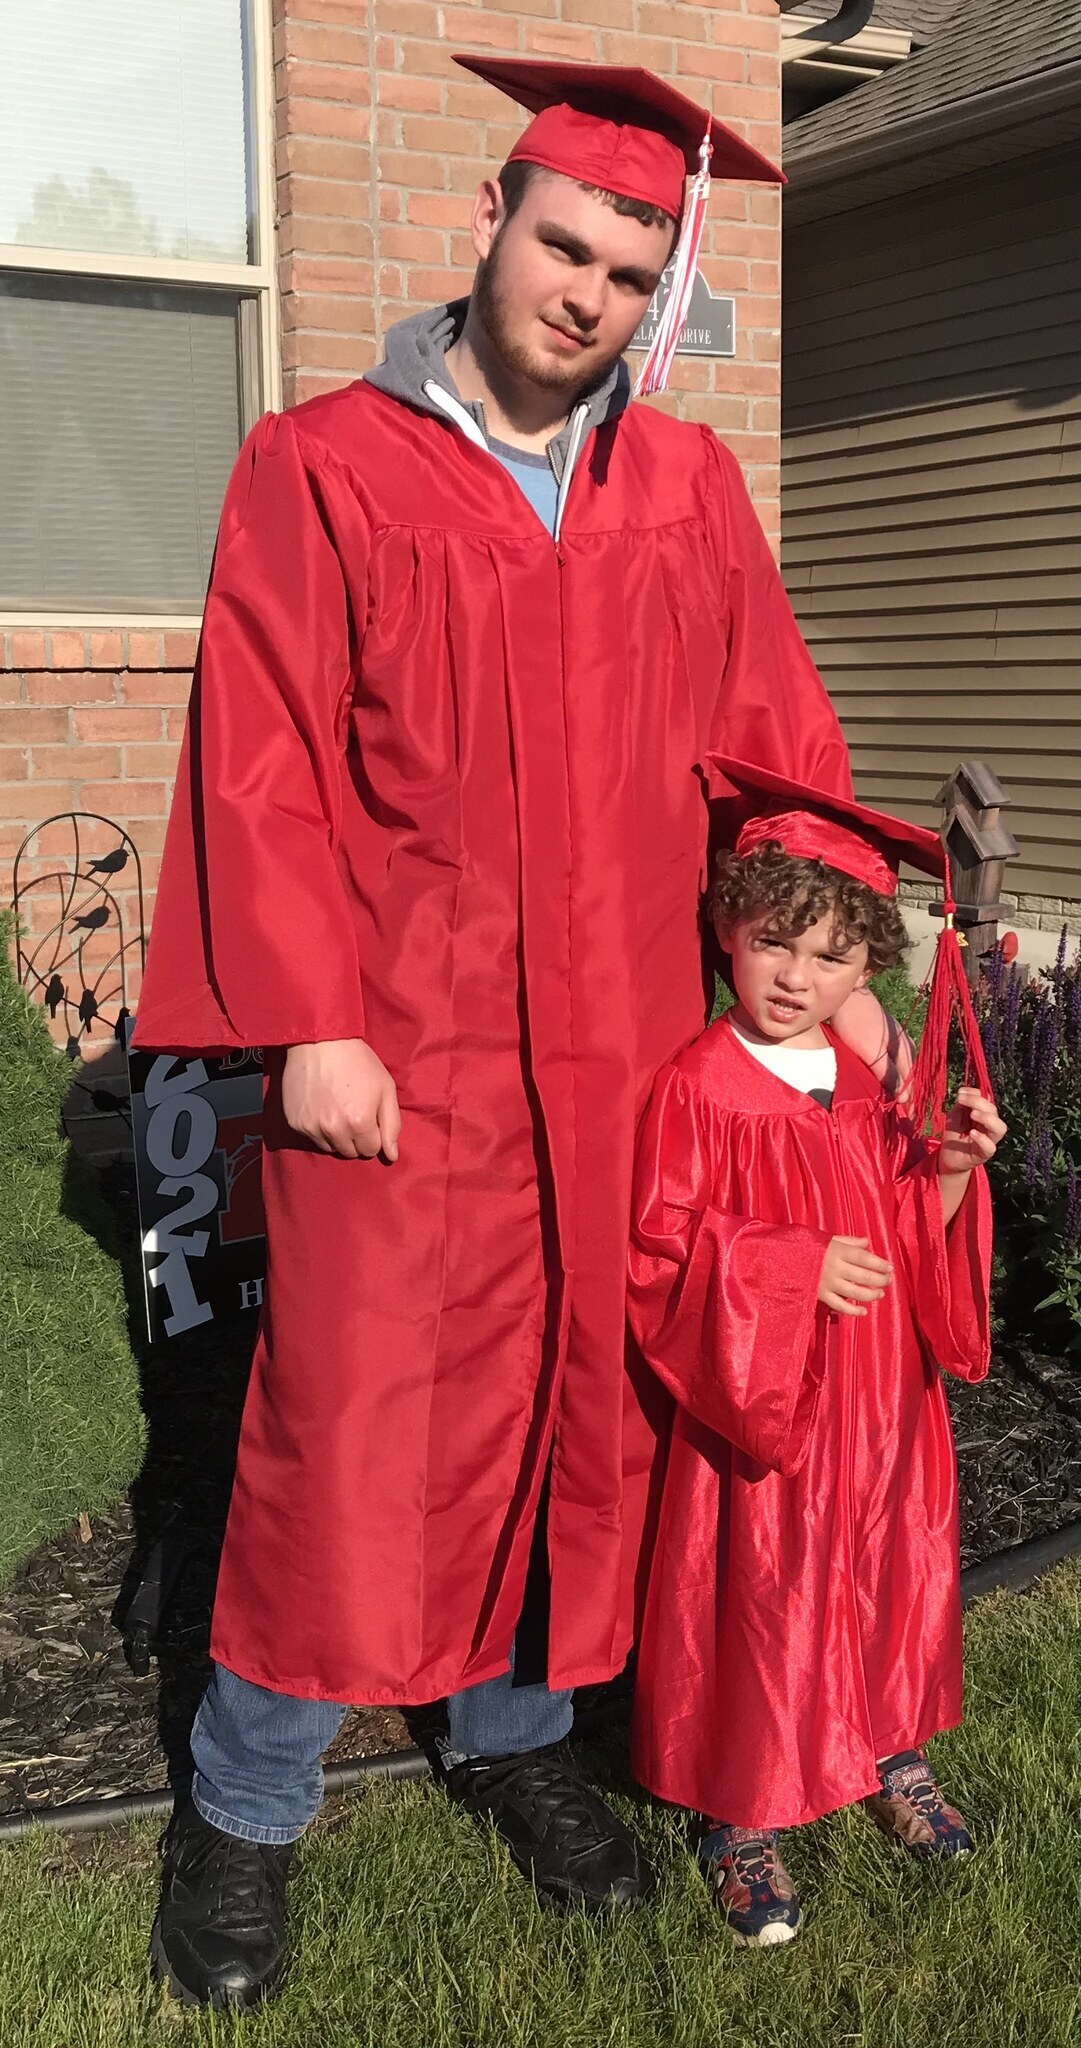 HHS Graduate with his nephew